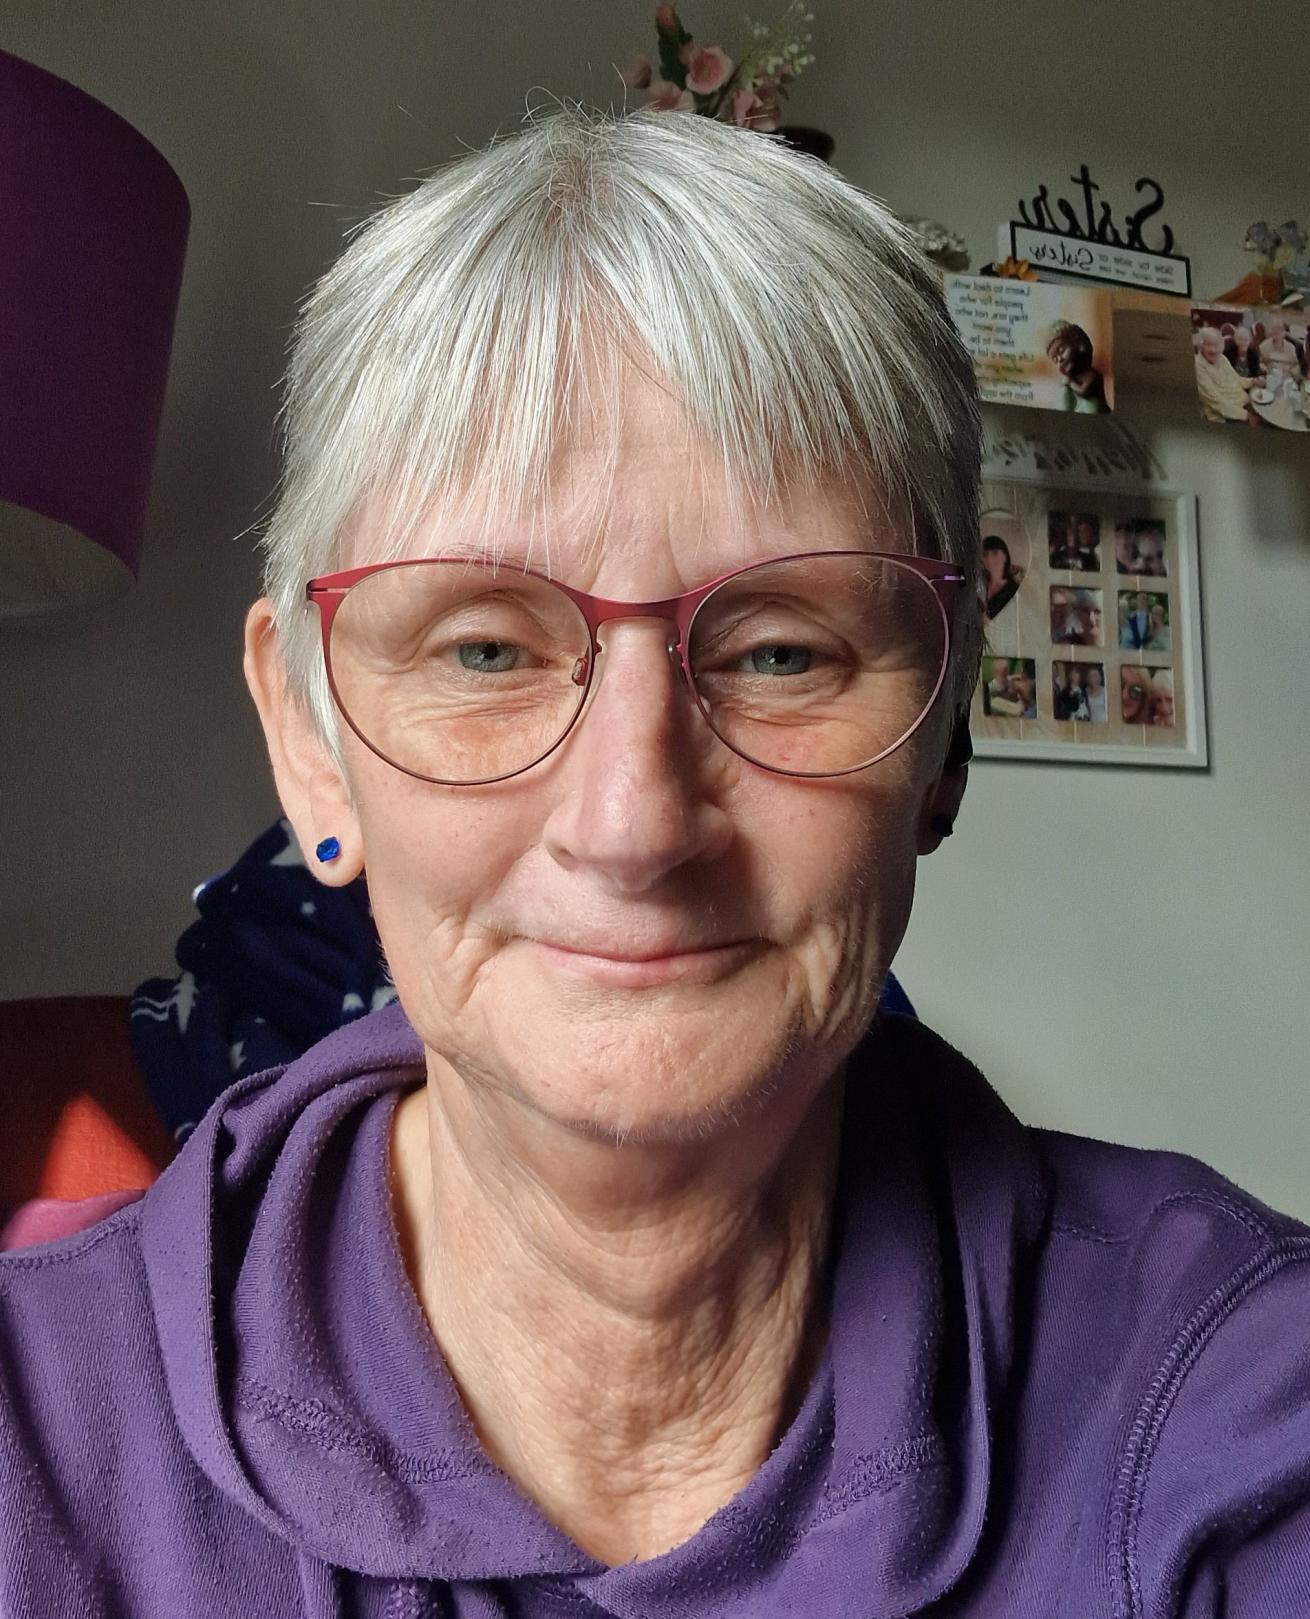 A white woman in her 70s, sat on a sofa in her flat, smiling at the camera.